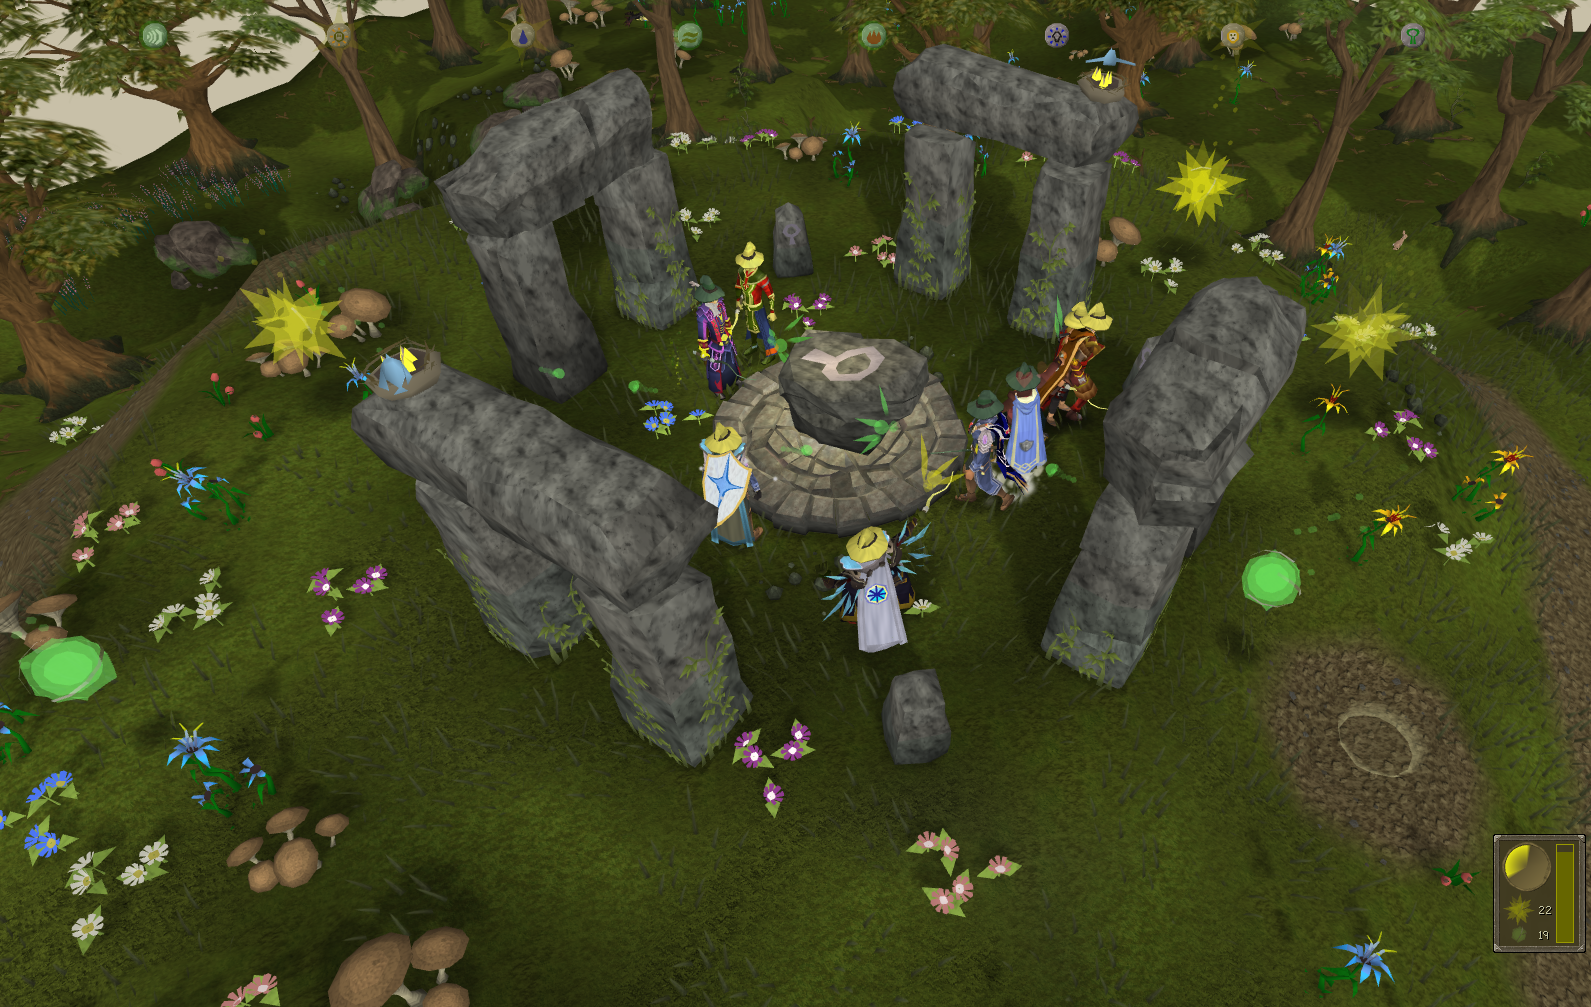 http://images3.wikia.nocookie.net/__cb20111129163014/runescape/images/9/92/The_Great_Orb_Project.png